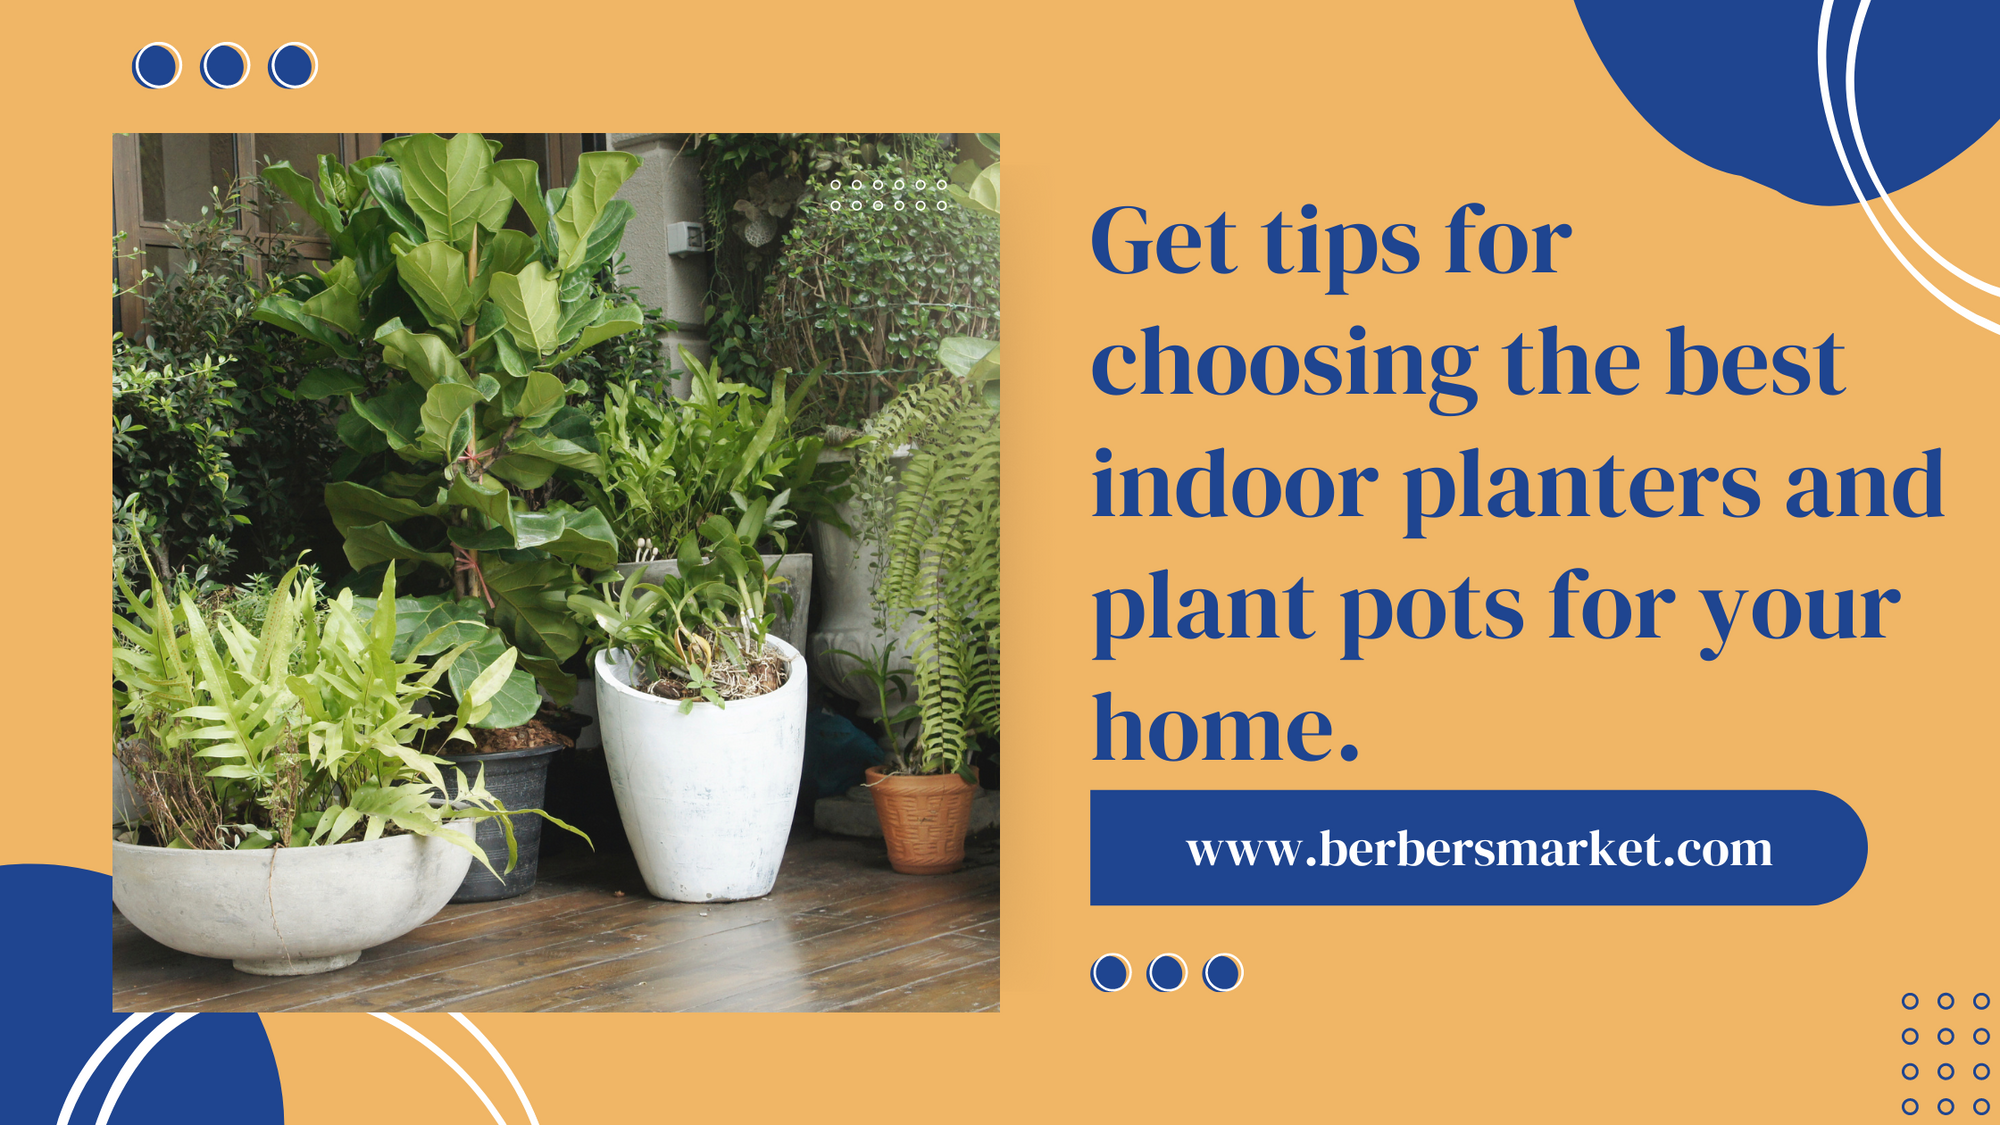 Get tips for choosing the best indoor planters and plant pots for your home.